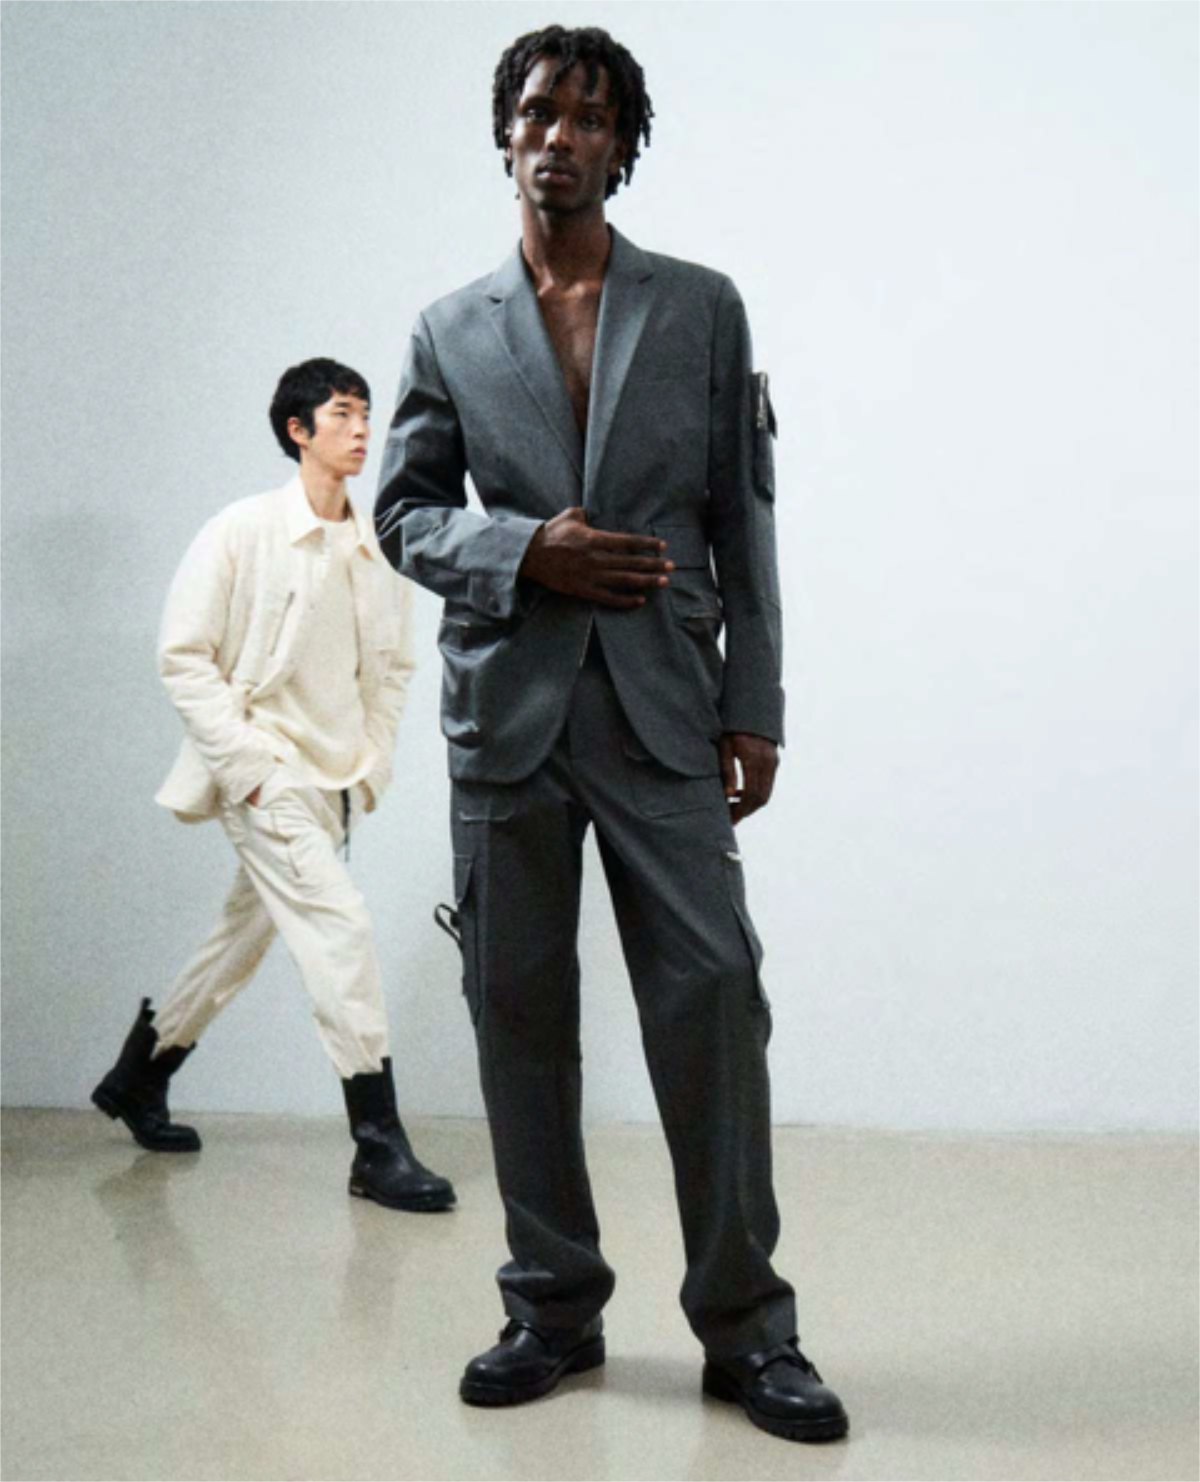 Helmut Lang Presents Its New Resort 2022 Men's Collection